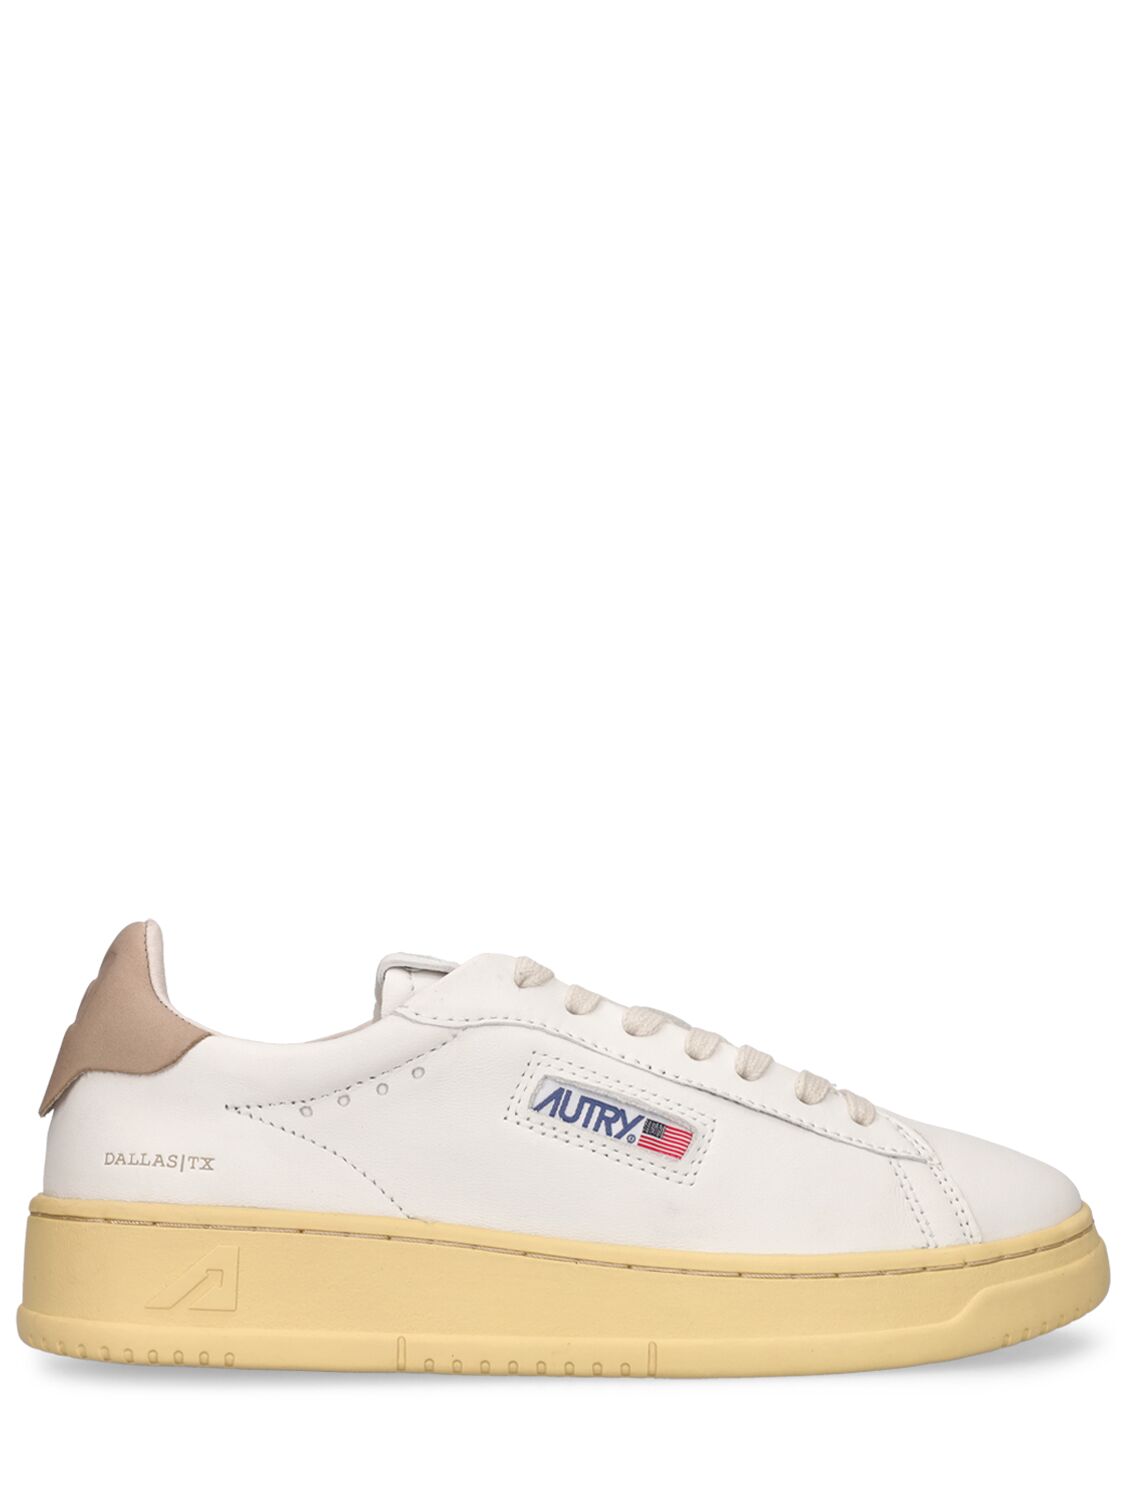 Dallas Low Leather Sneakers – WOMEN > SHOES > SNEAKERS